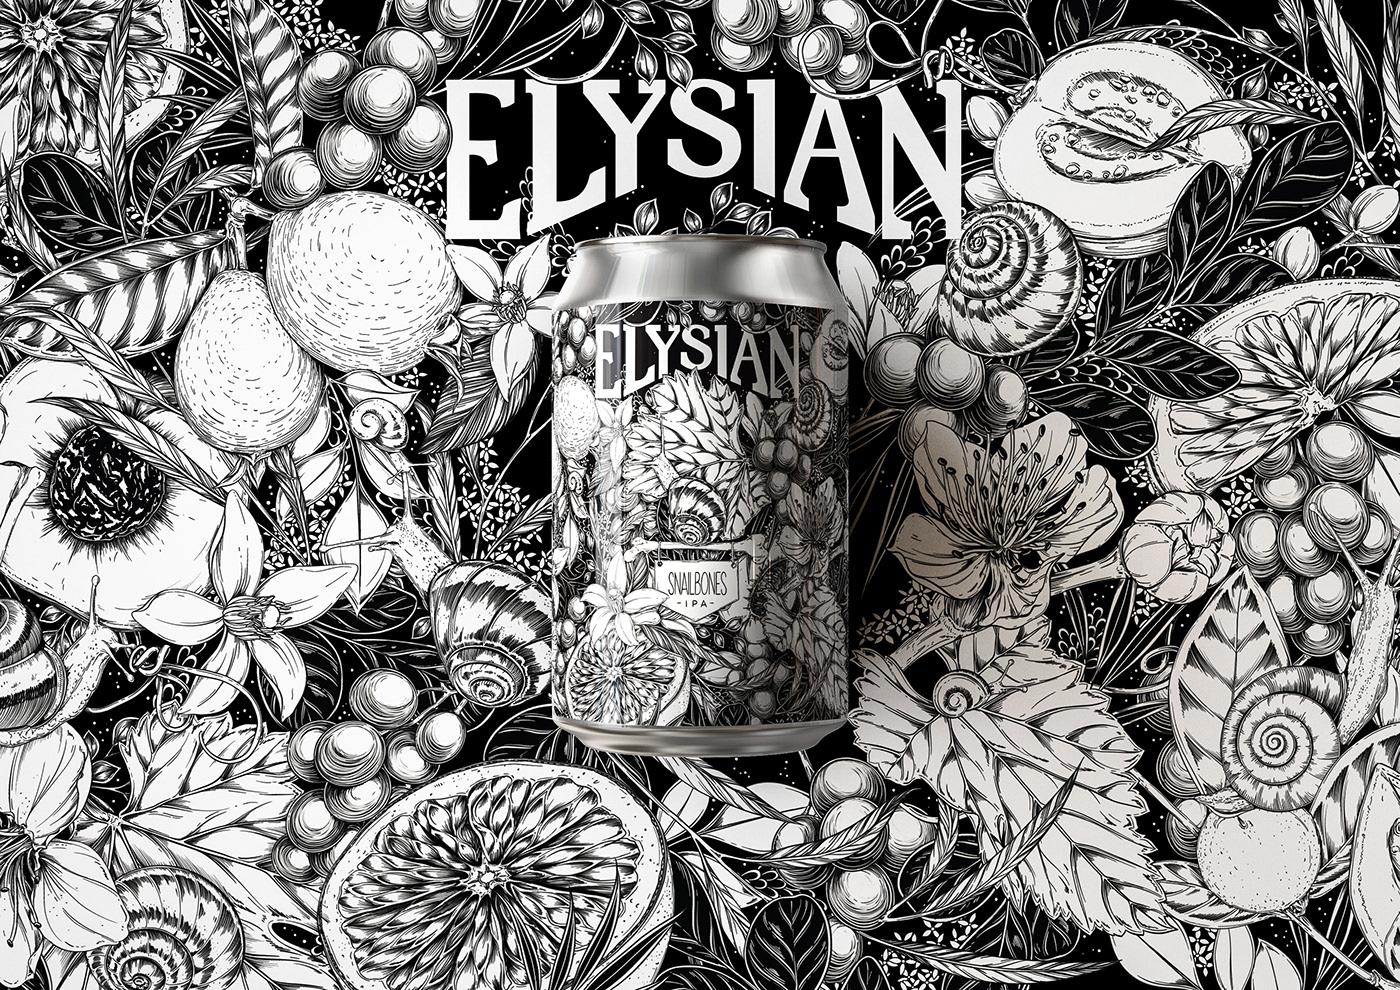 Black and white illustration featuring botanicals and other elements. Reimagined label of Snailbones